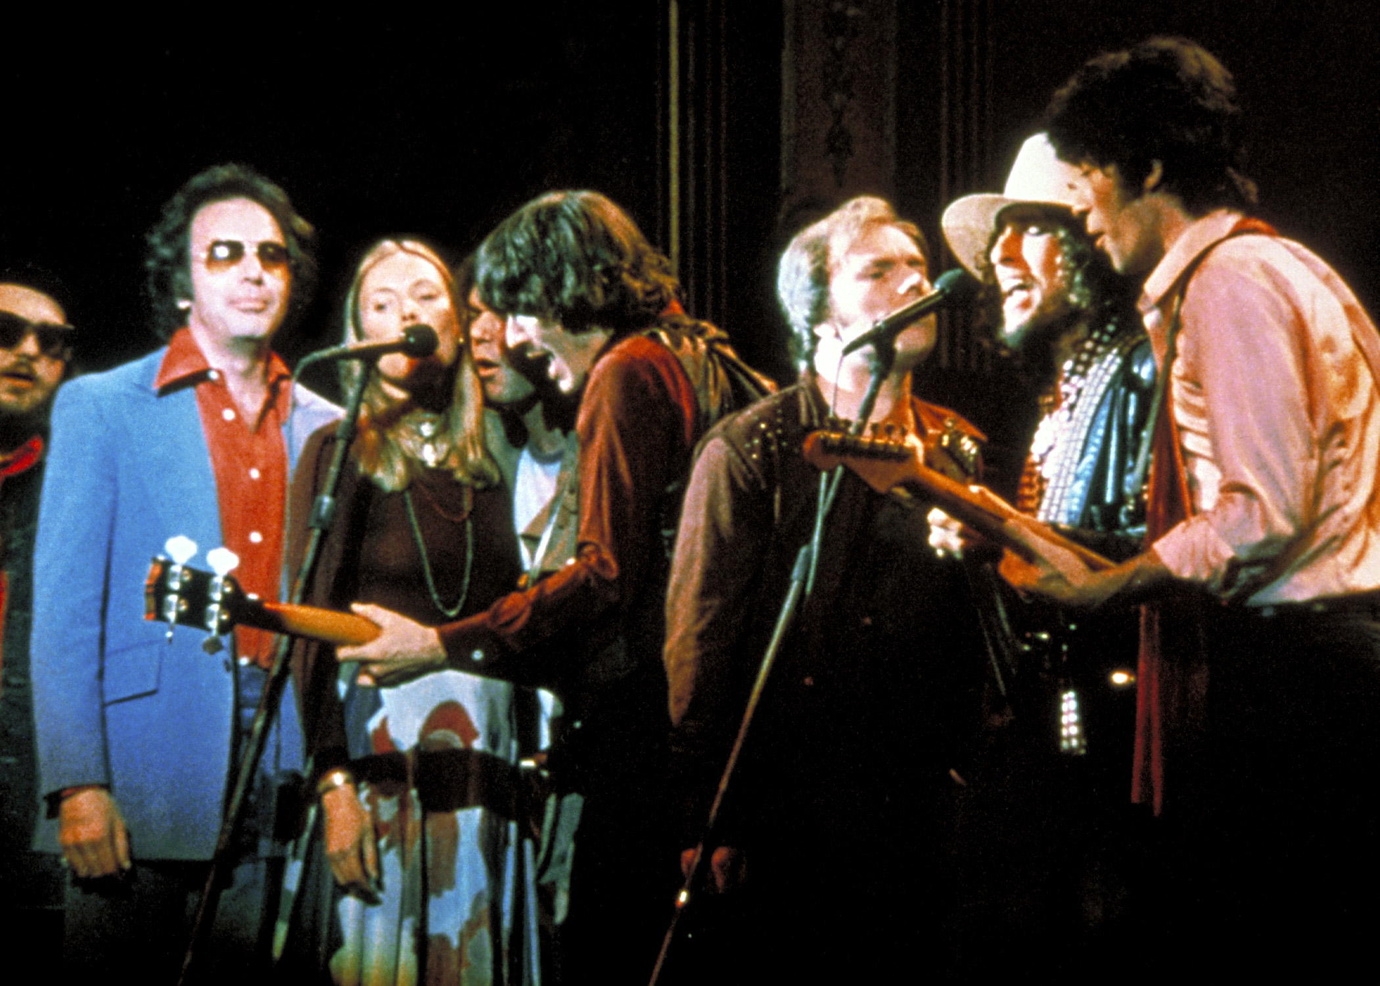 Band - The Last Waltz, The